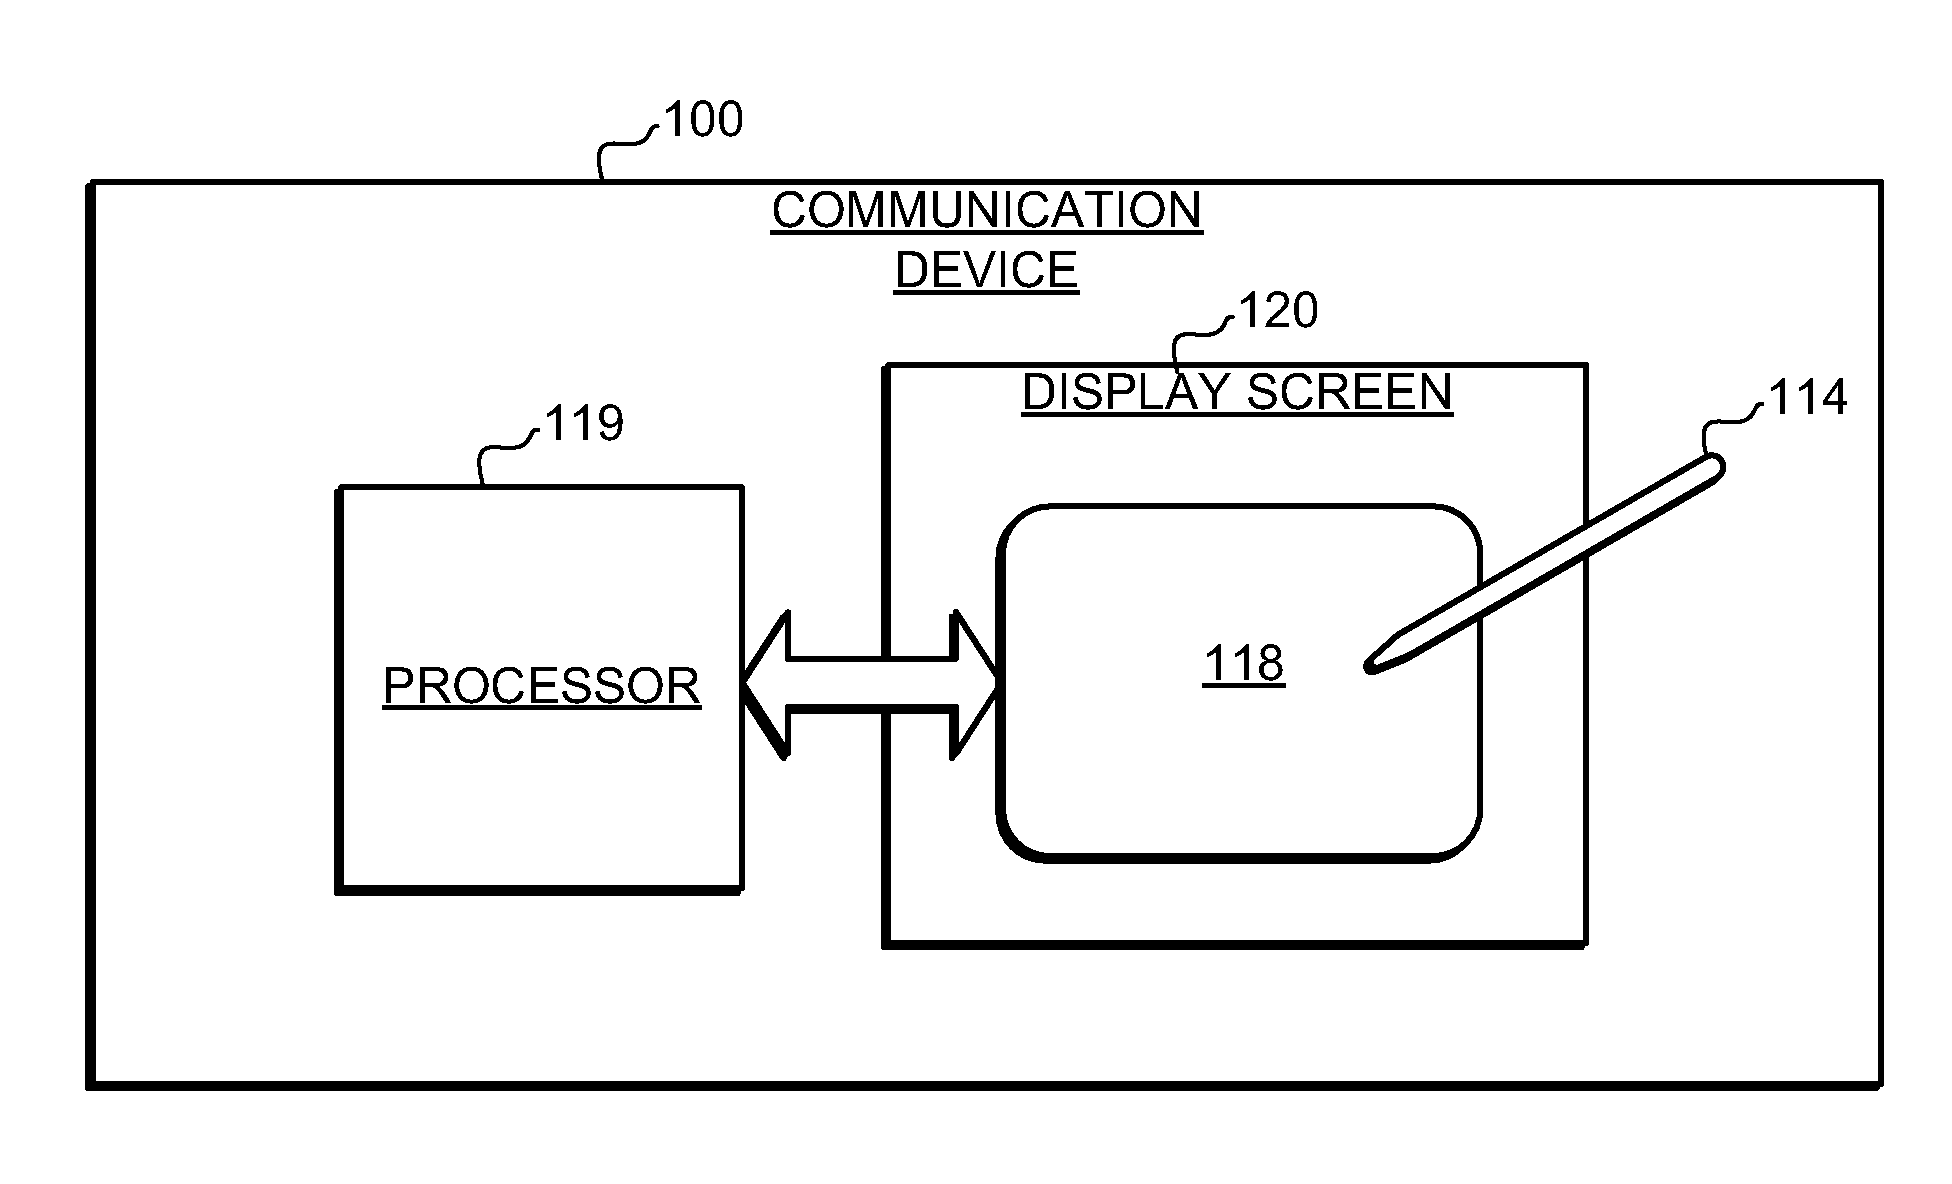 Handheld communication device and method for conference call initiation